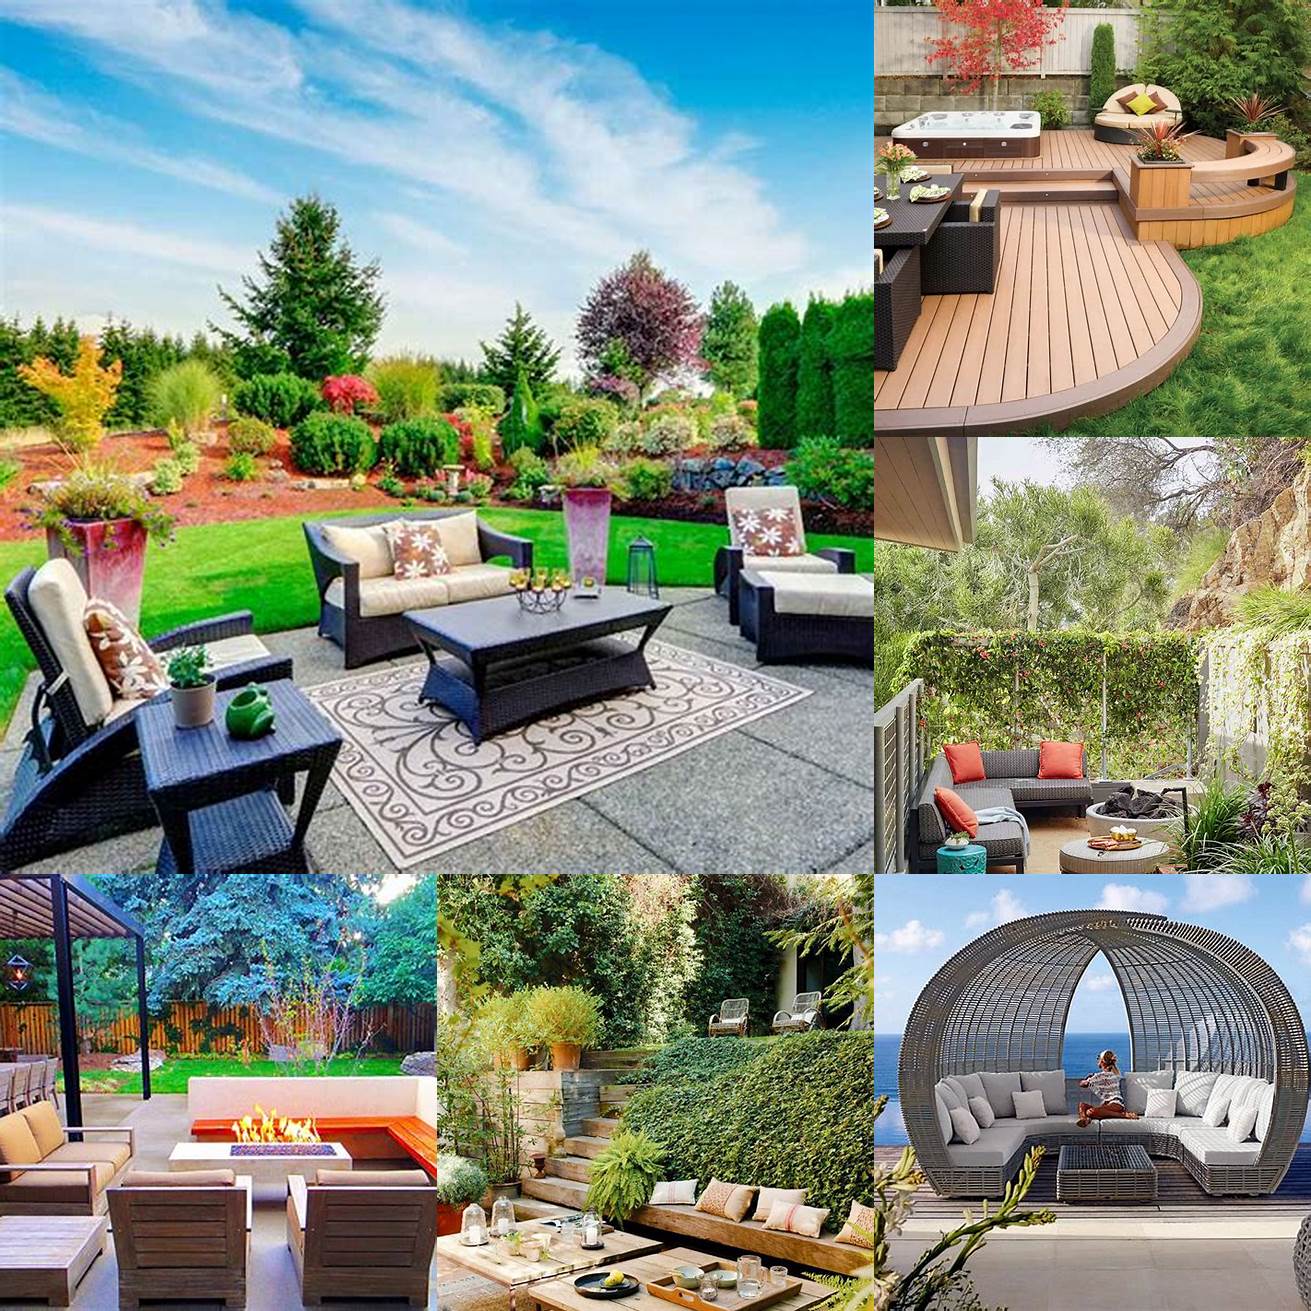 Create a Relaxing Outdoor Area